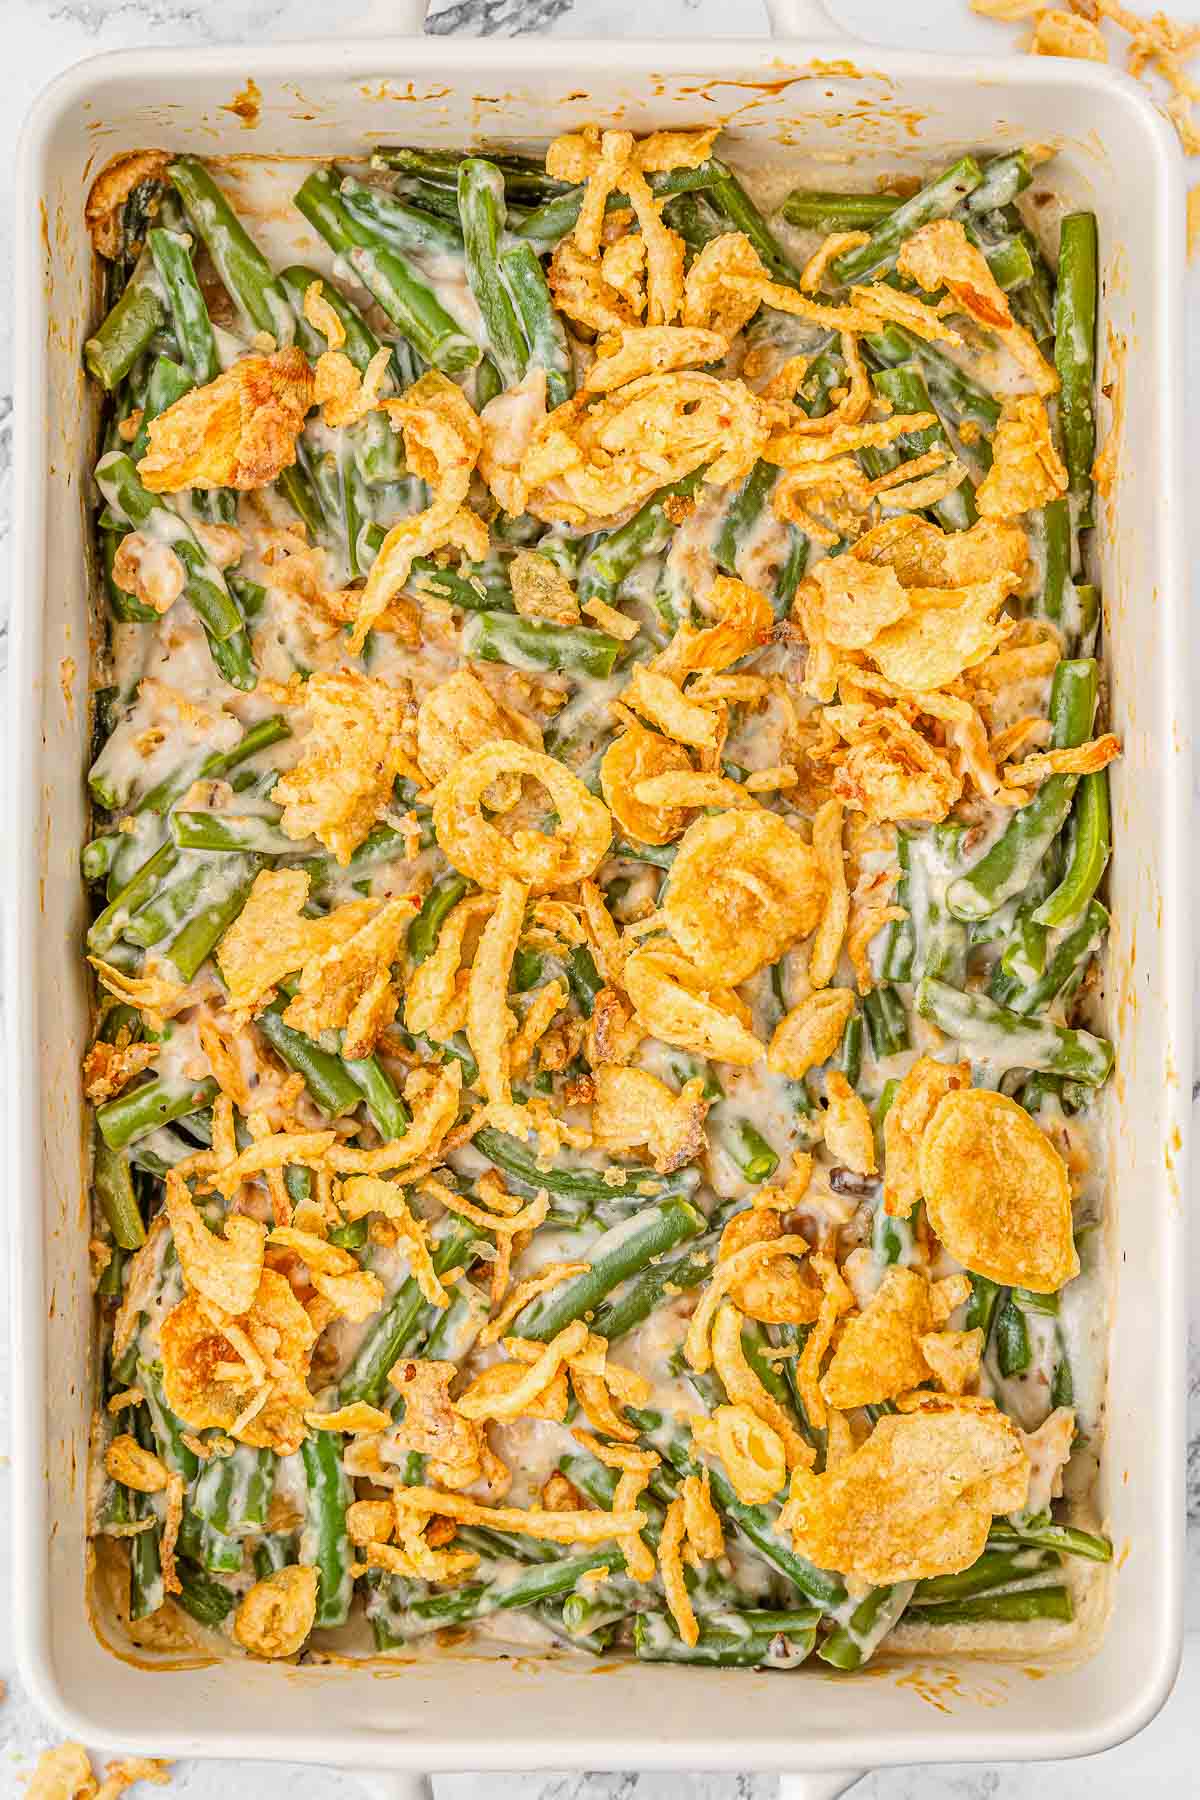 Green bean casserole in a white casserole dish topped with fried onions.